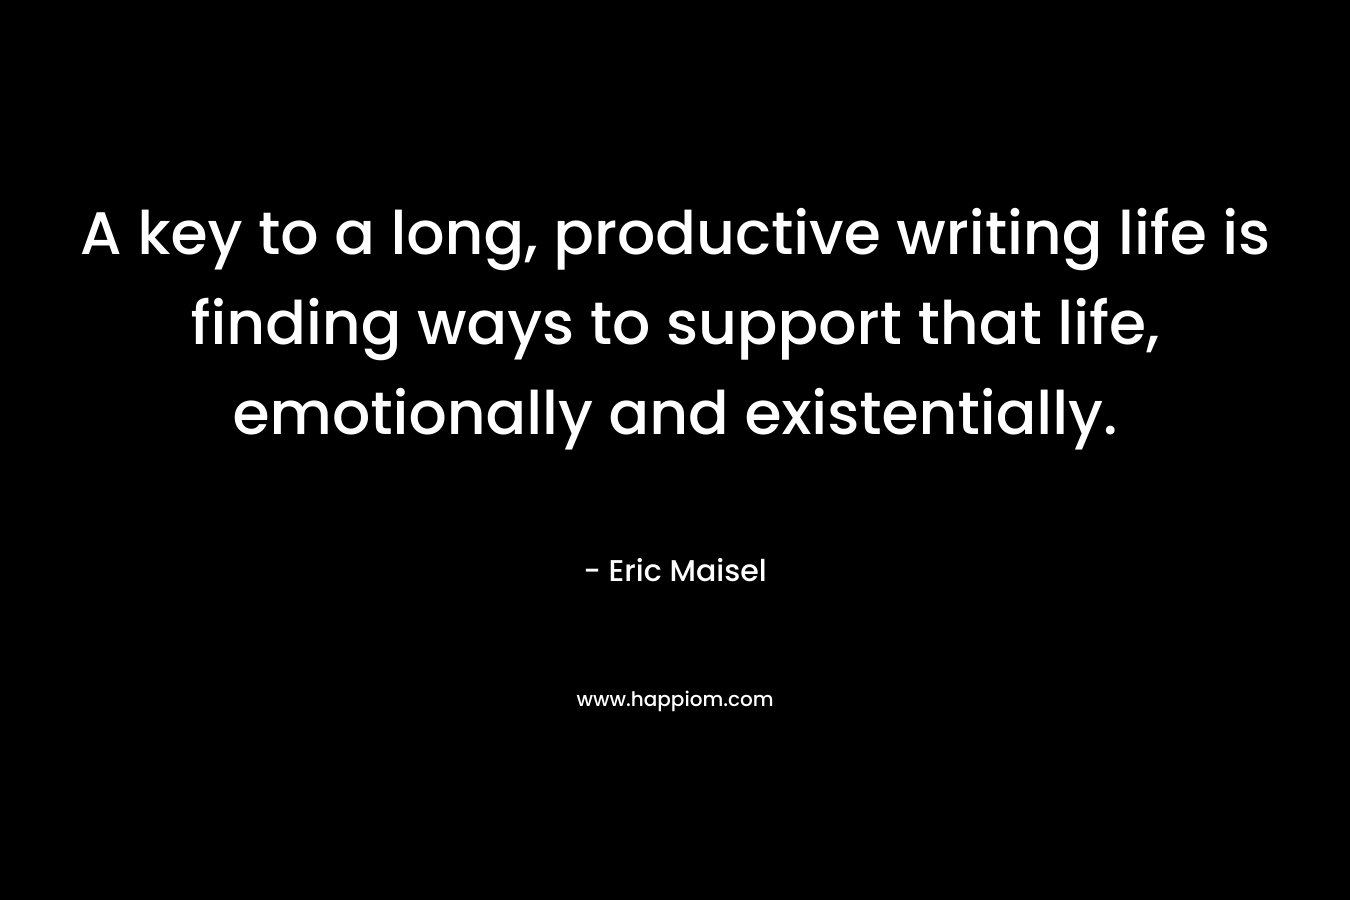 A key to a long, productive writing life is finding ways to support that life, emotionally and existentially.